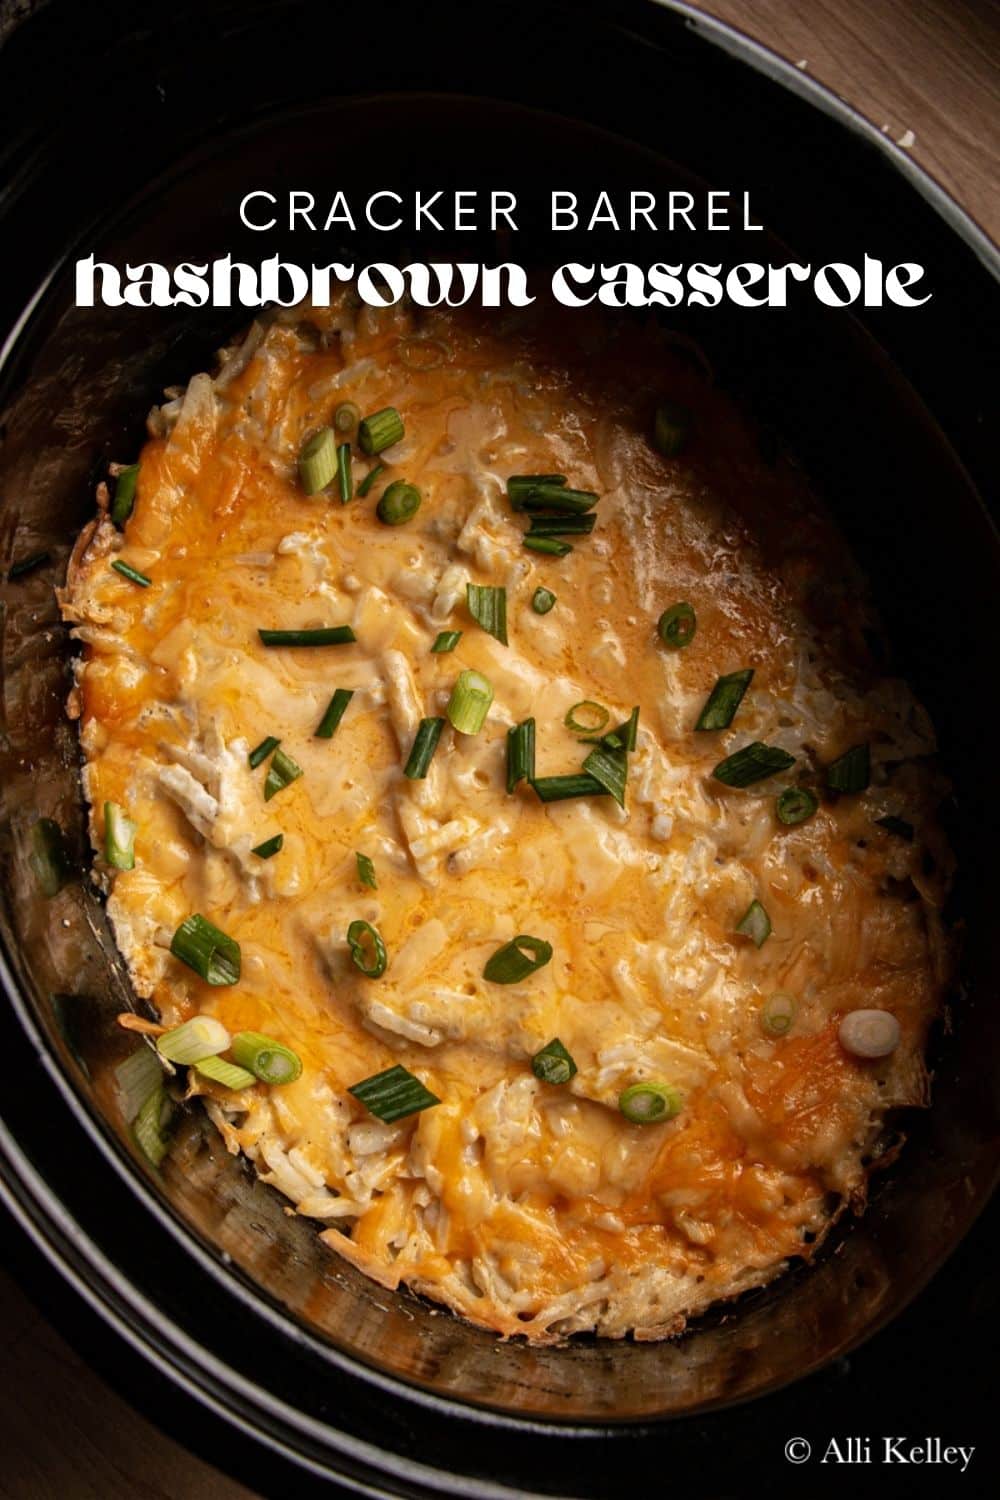 Crockpot hashbrown casserole is a dish the whole family will love! It's cheesy, comforting, and effortless to make. My easy hashbrown casserole is perfect for breakfast, brunch, or dinner – it's that versatile!